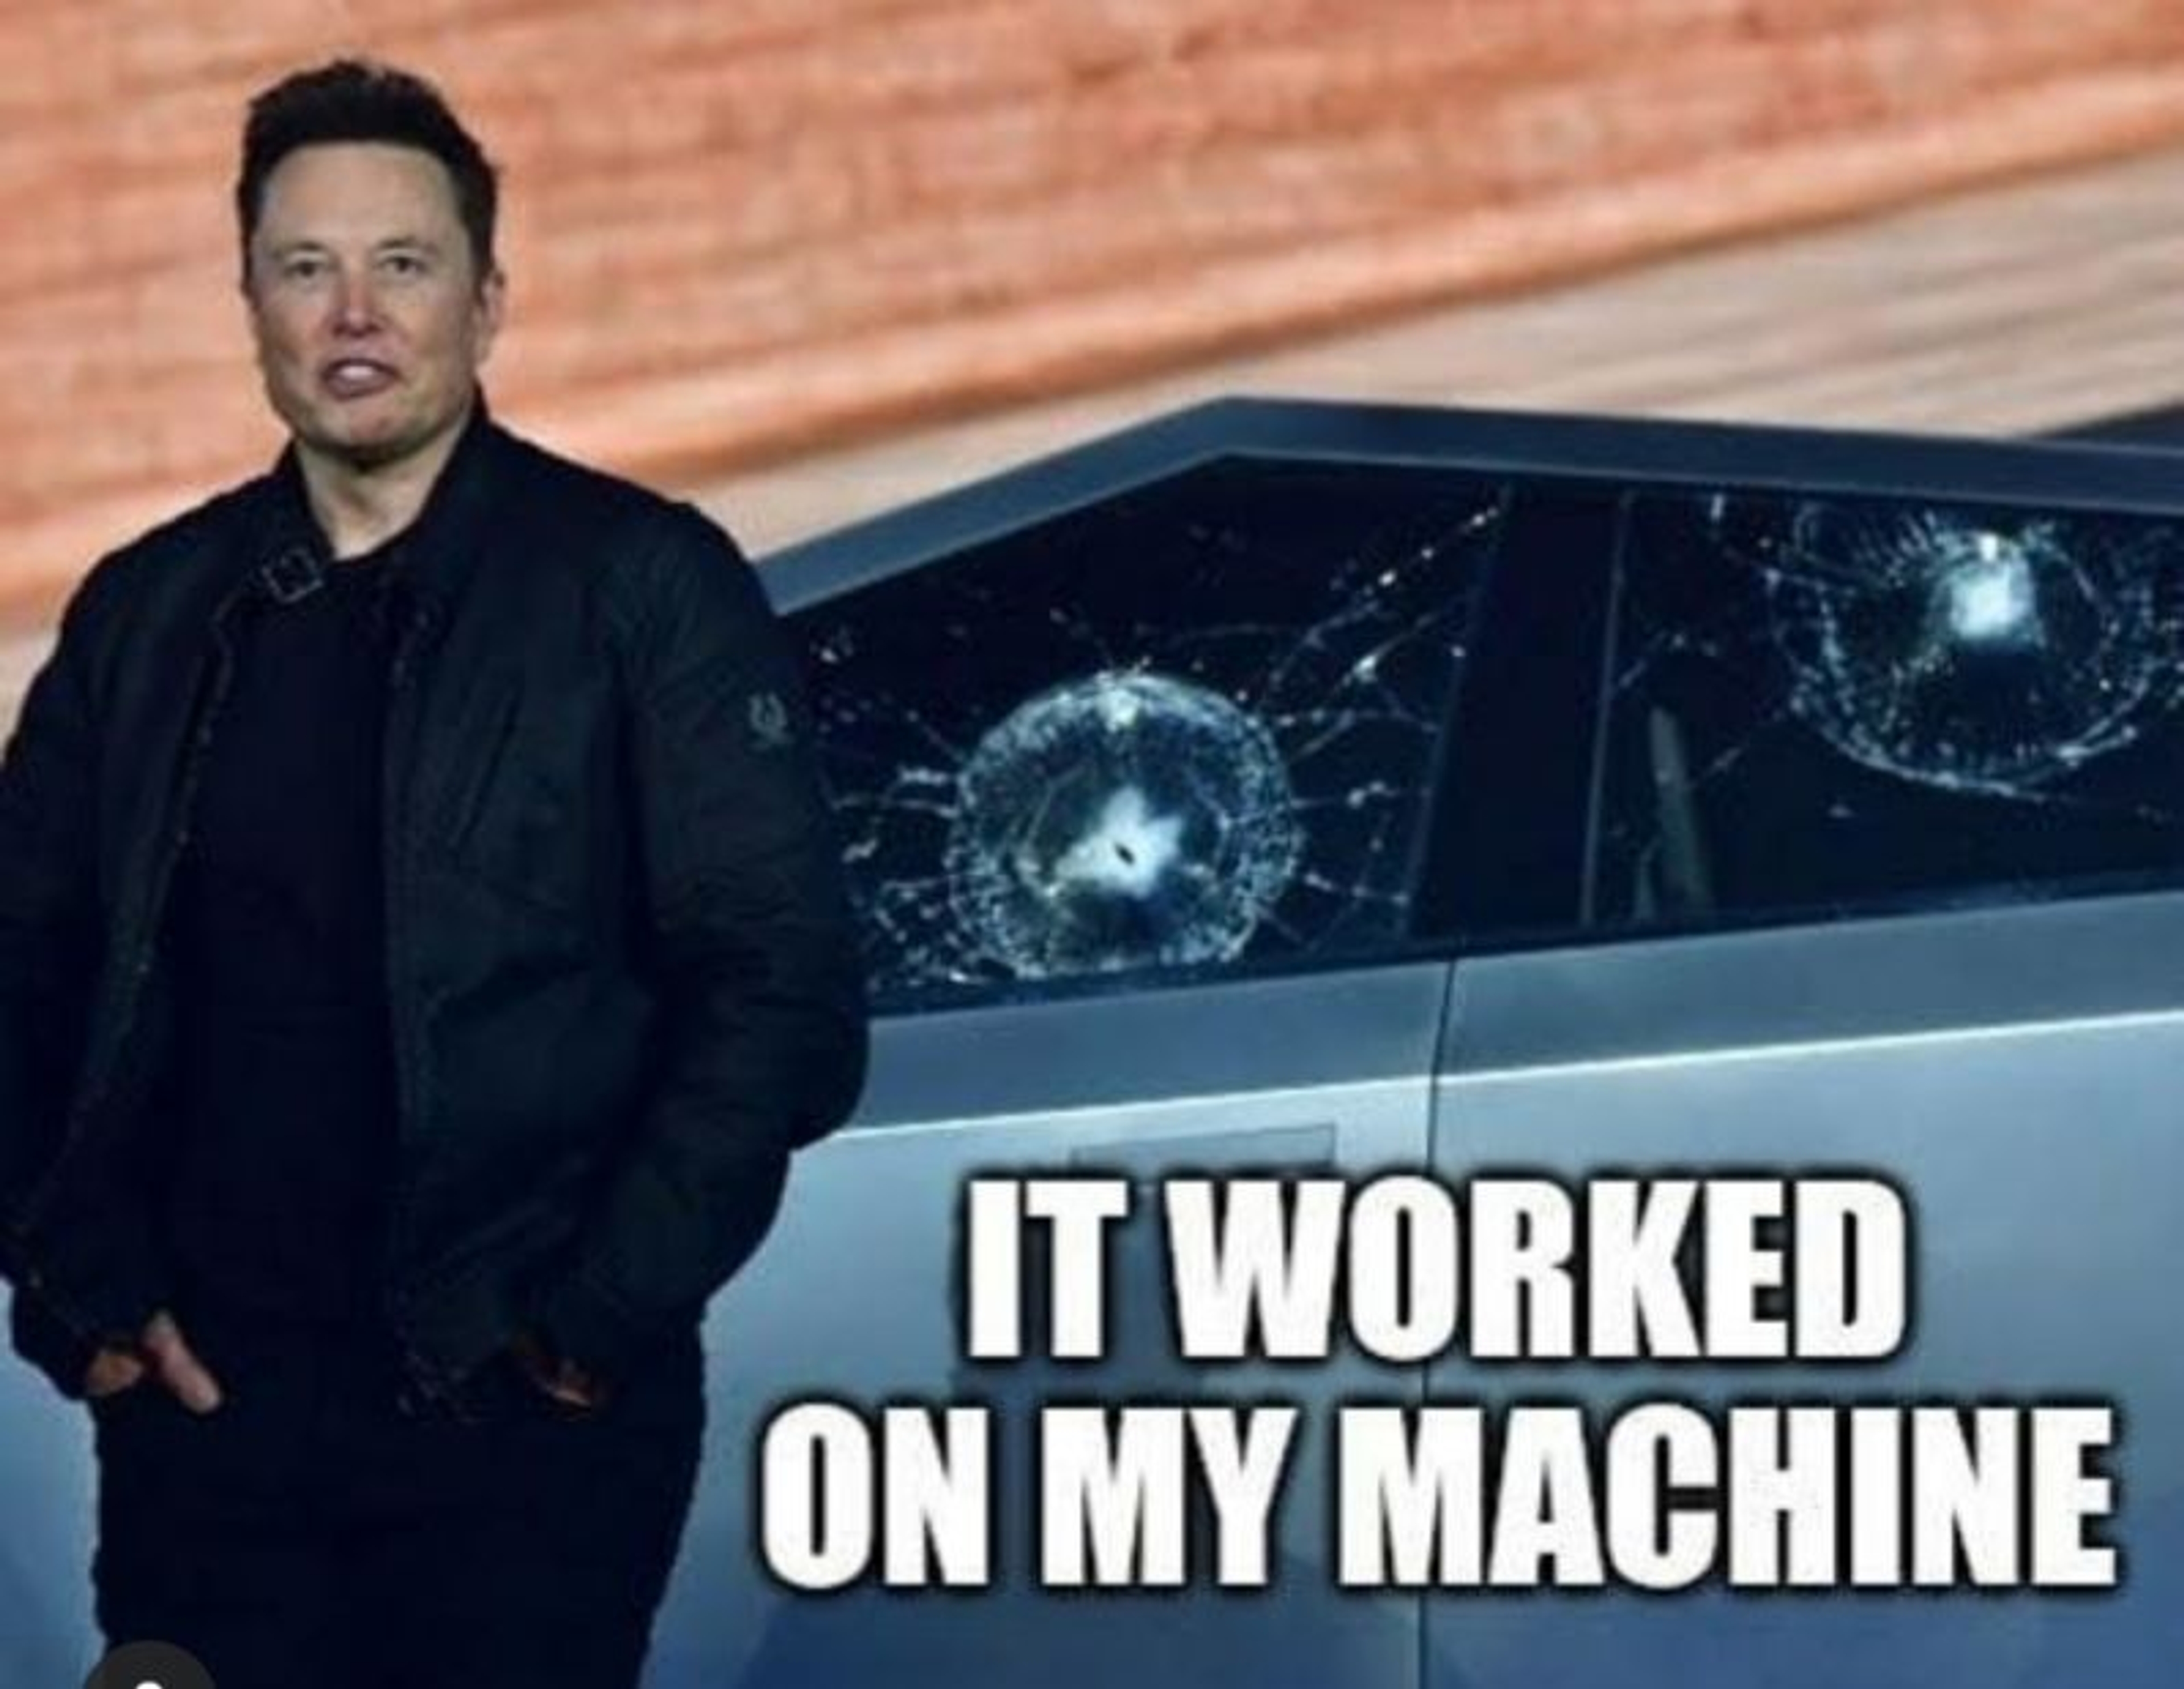 elon in front of broken cyber truck window with caption "it worked on my machine"